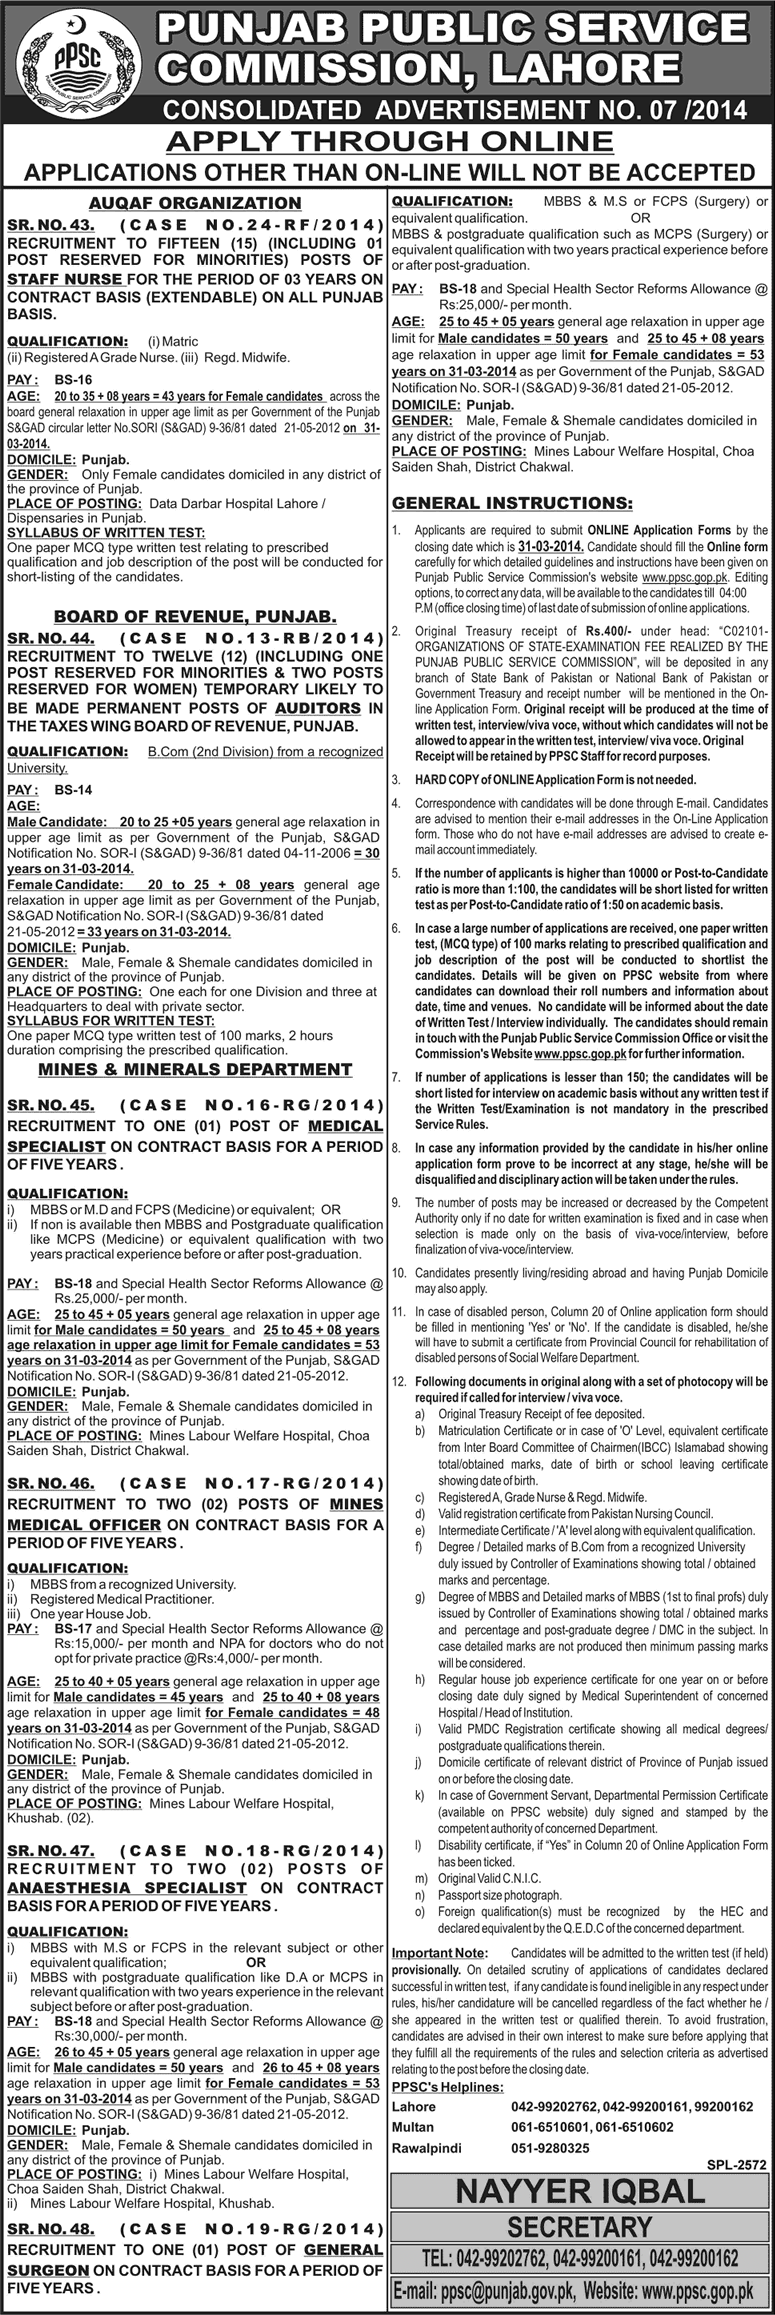 PPSC Jobs 2014 March Apply Online Ad No 07/2014